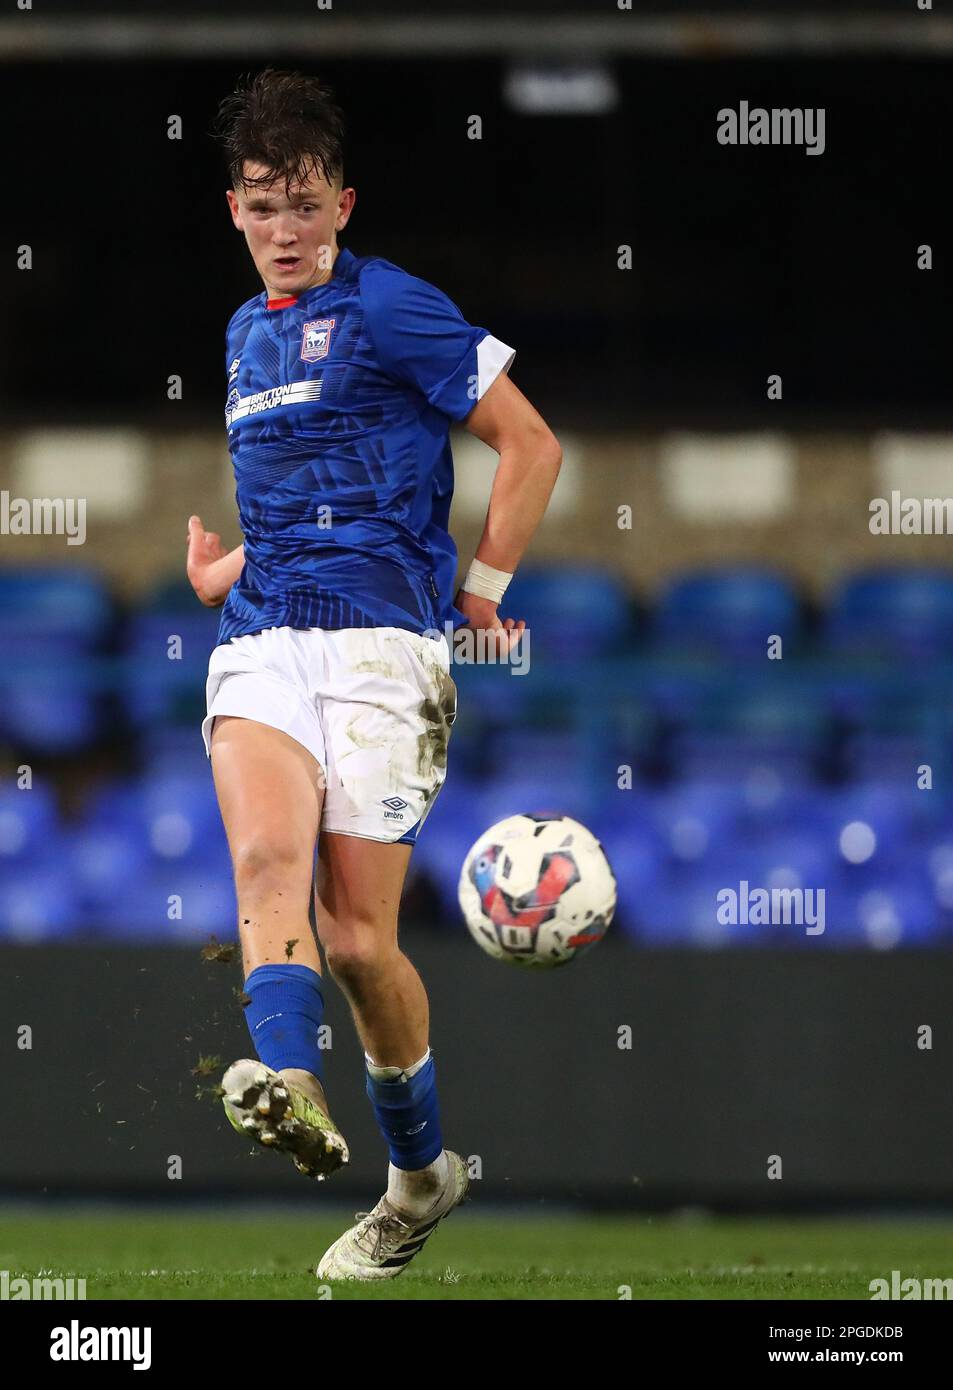 Finley Barbrook of Ipswich Town - Ipswich Town v West Ham United, FA Youth Cup Sixth Round, Portman Road, Ipswich, UK - 22nd February 2023 Stock Photo